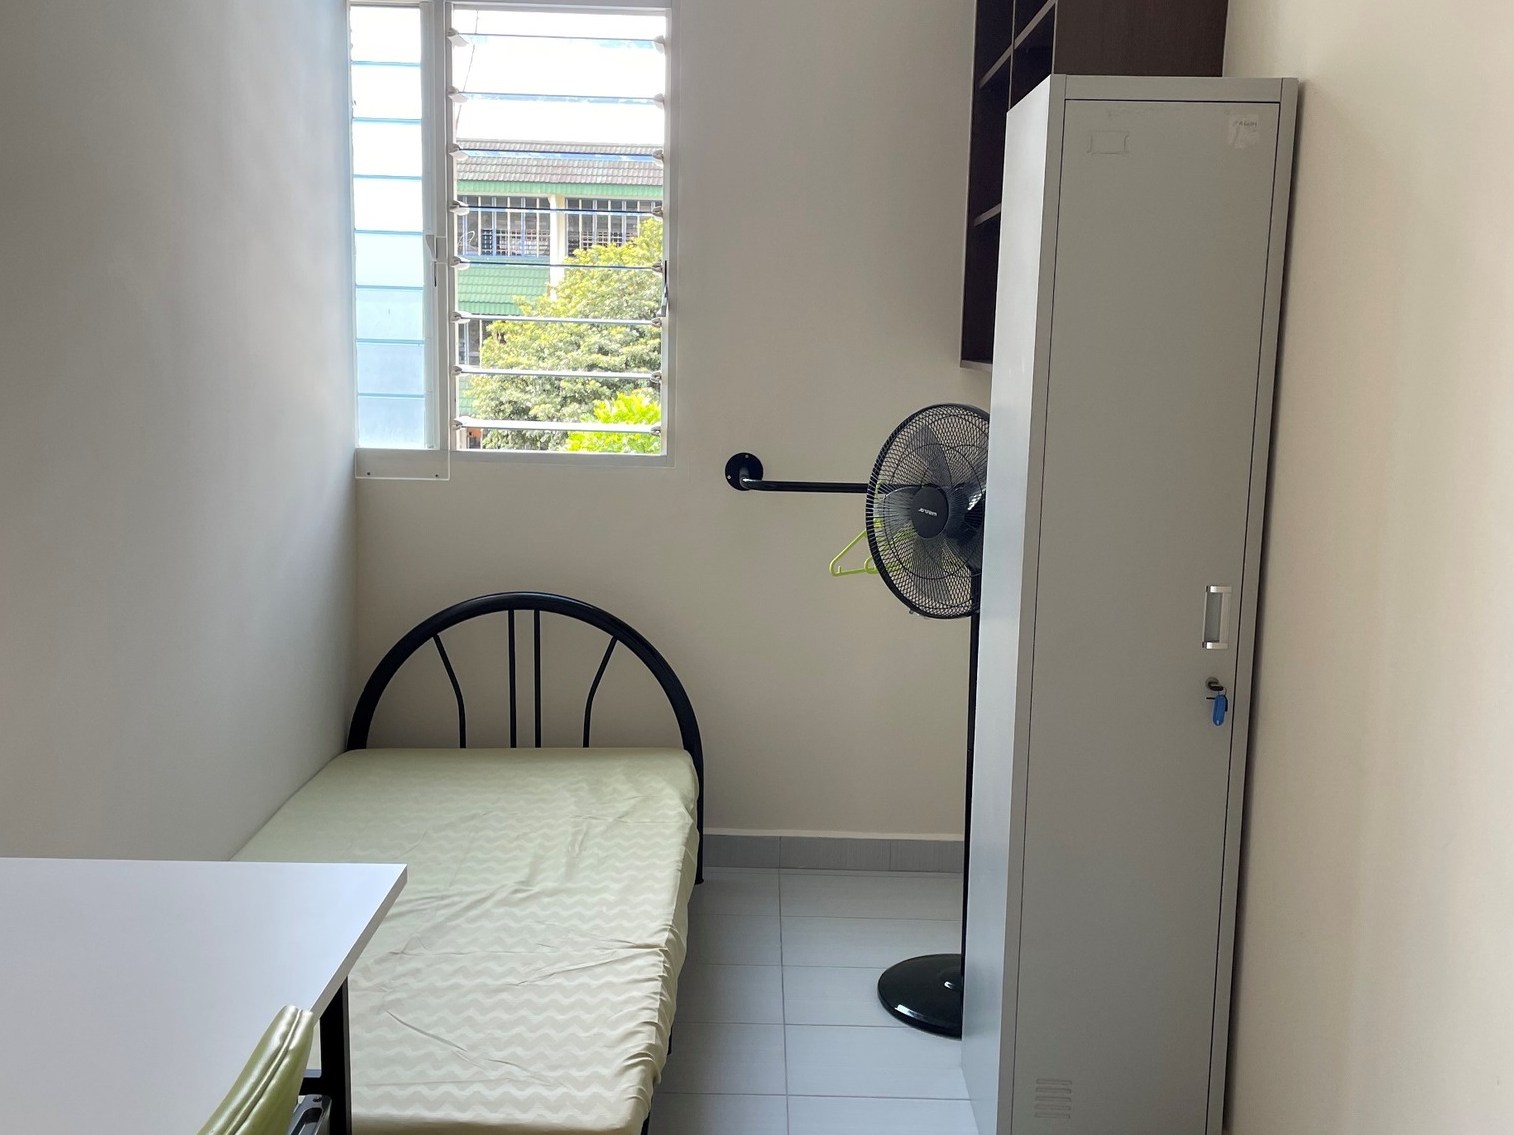 New Scandinavian Prisoncore Rental Apartments for Singapore Singles Just Dropped